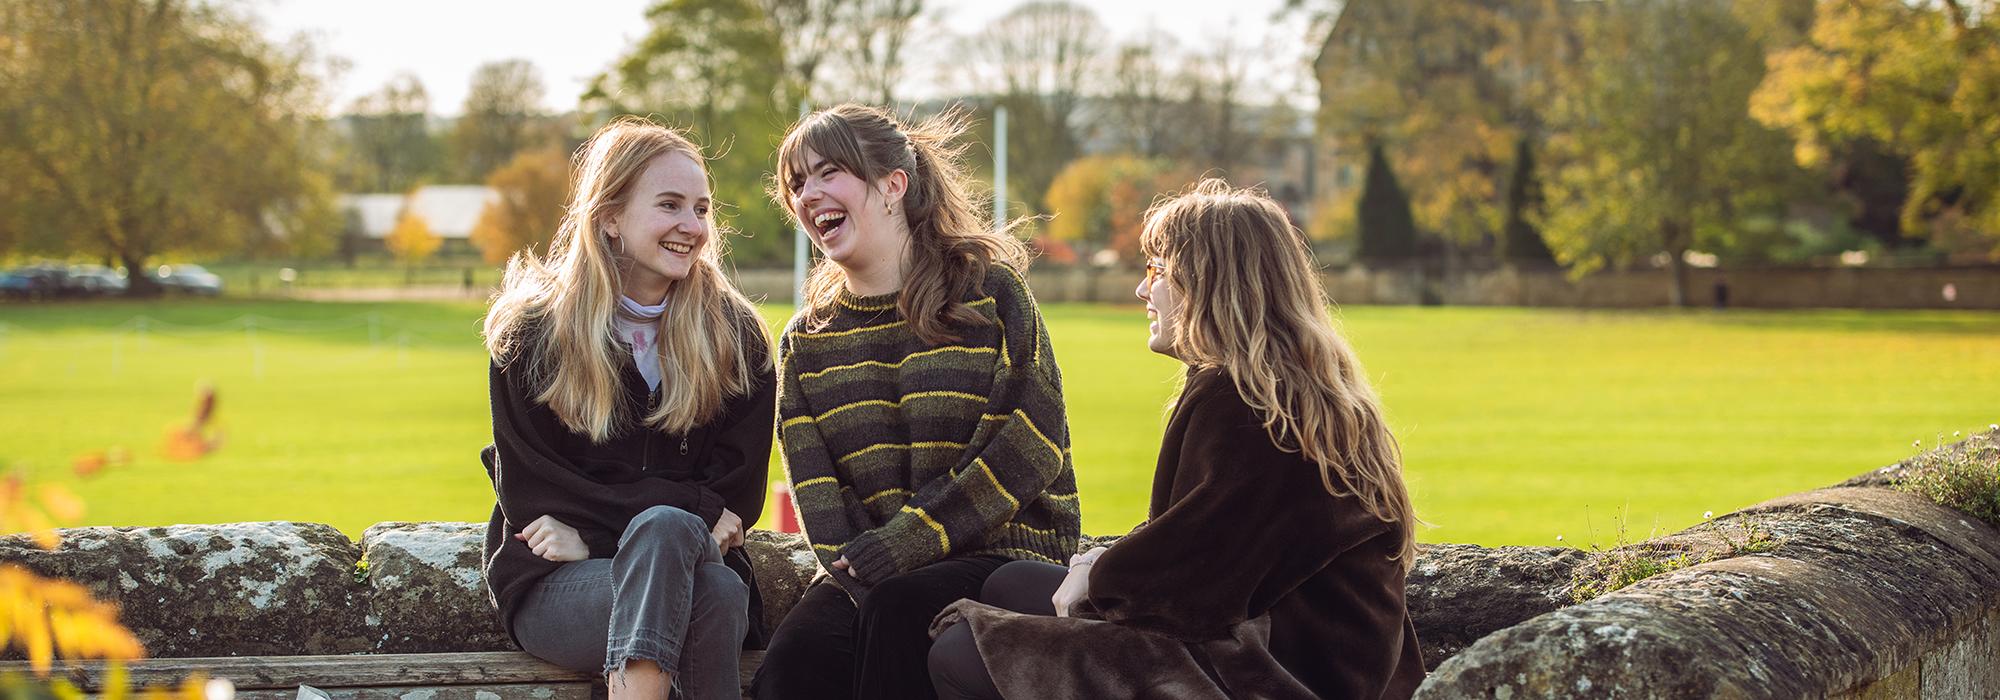 Students at the Tolkien Table in Fellows' Garden, 2019 - Photo: © John Cairns - www.johncairns.co.uk